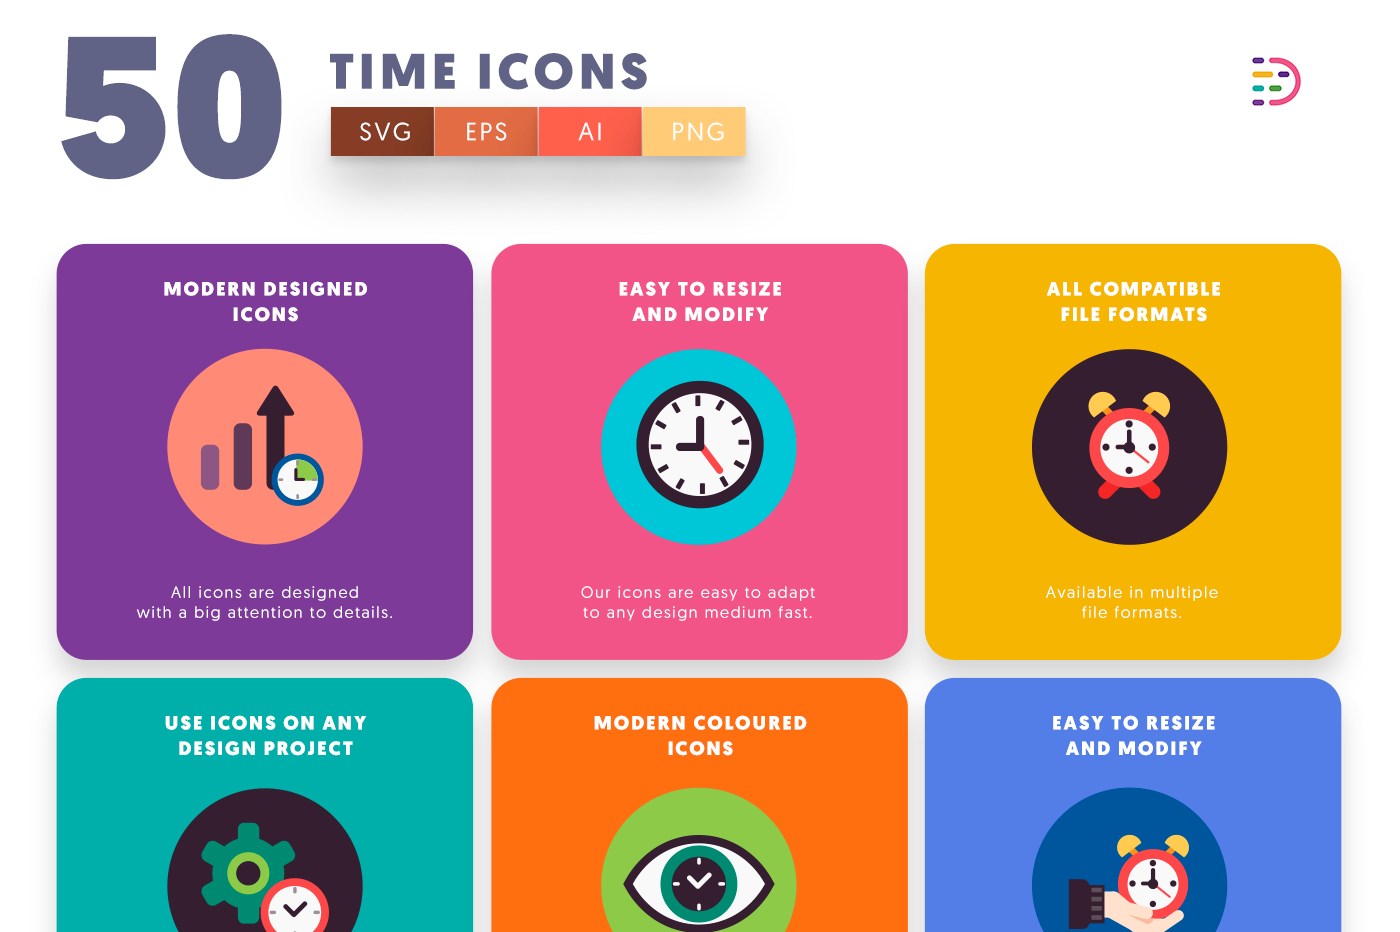 50 Time Flat Icons with colored backgrounds